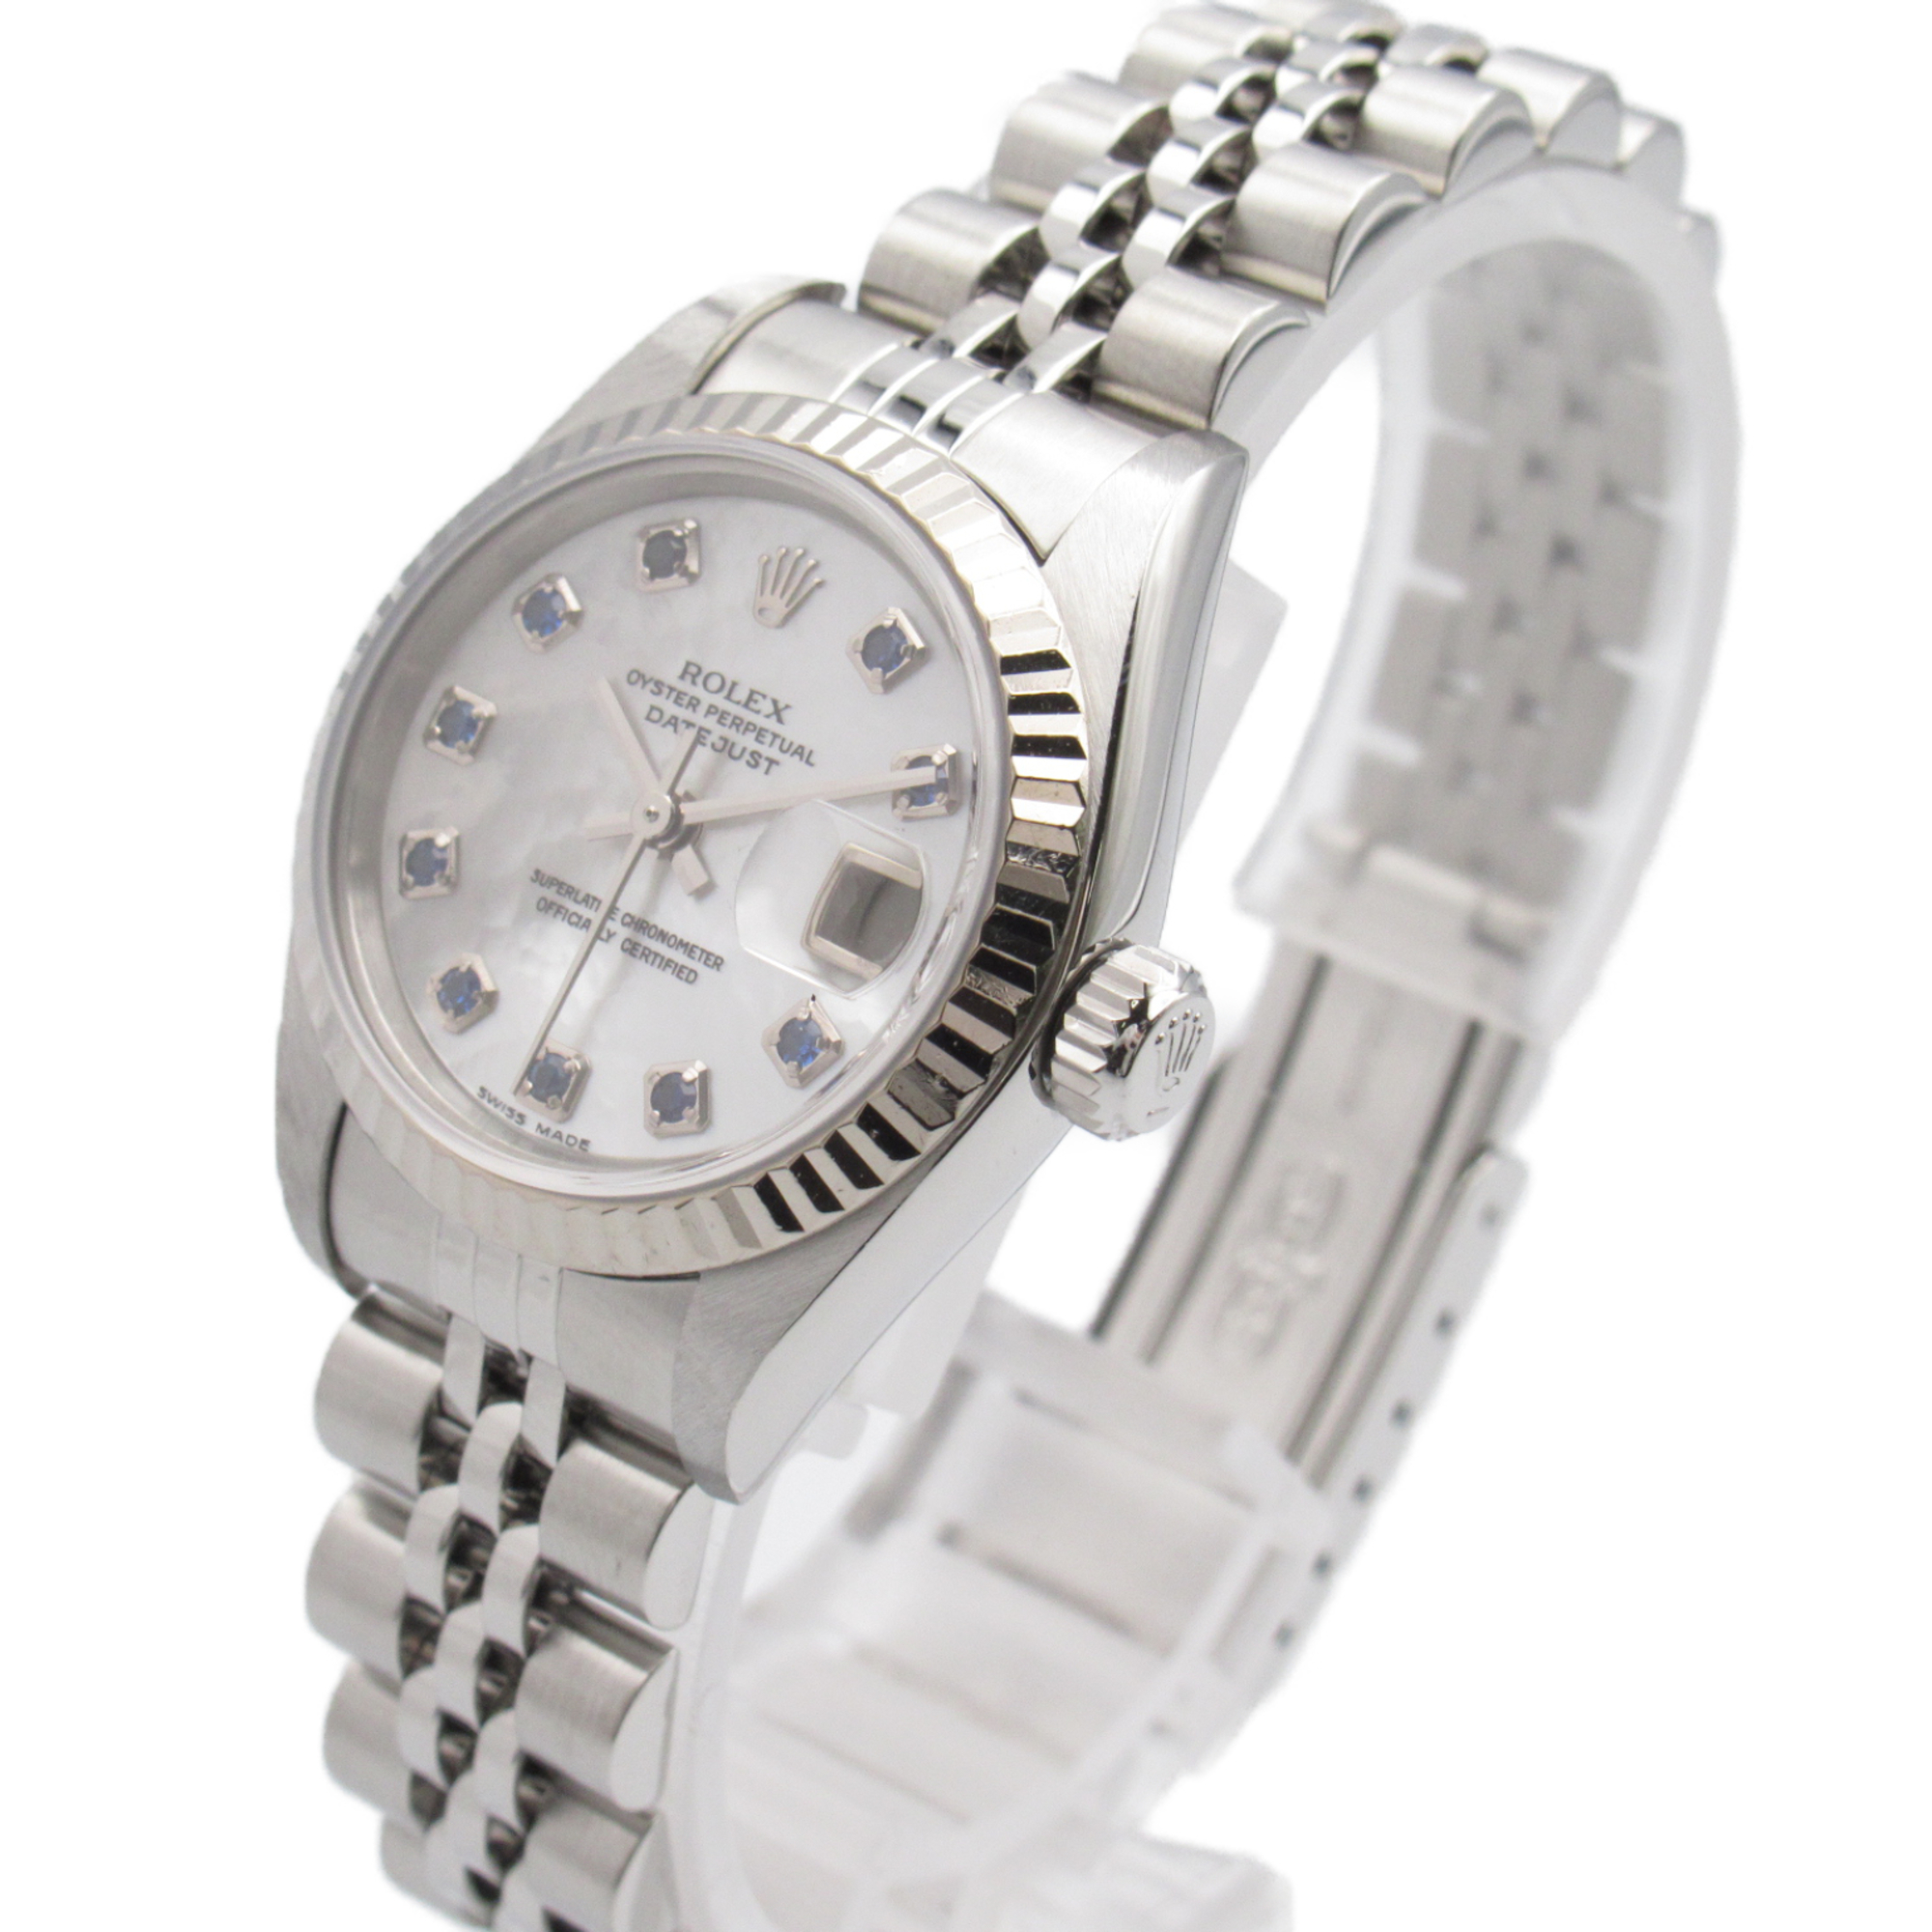 ROLEX Datejust 10P Sapphire F number Wrist Watch 79174NGS Mechanical Automatic White WH shell K18WG(WhiteGold) Stai 79174NGS